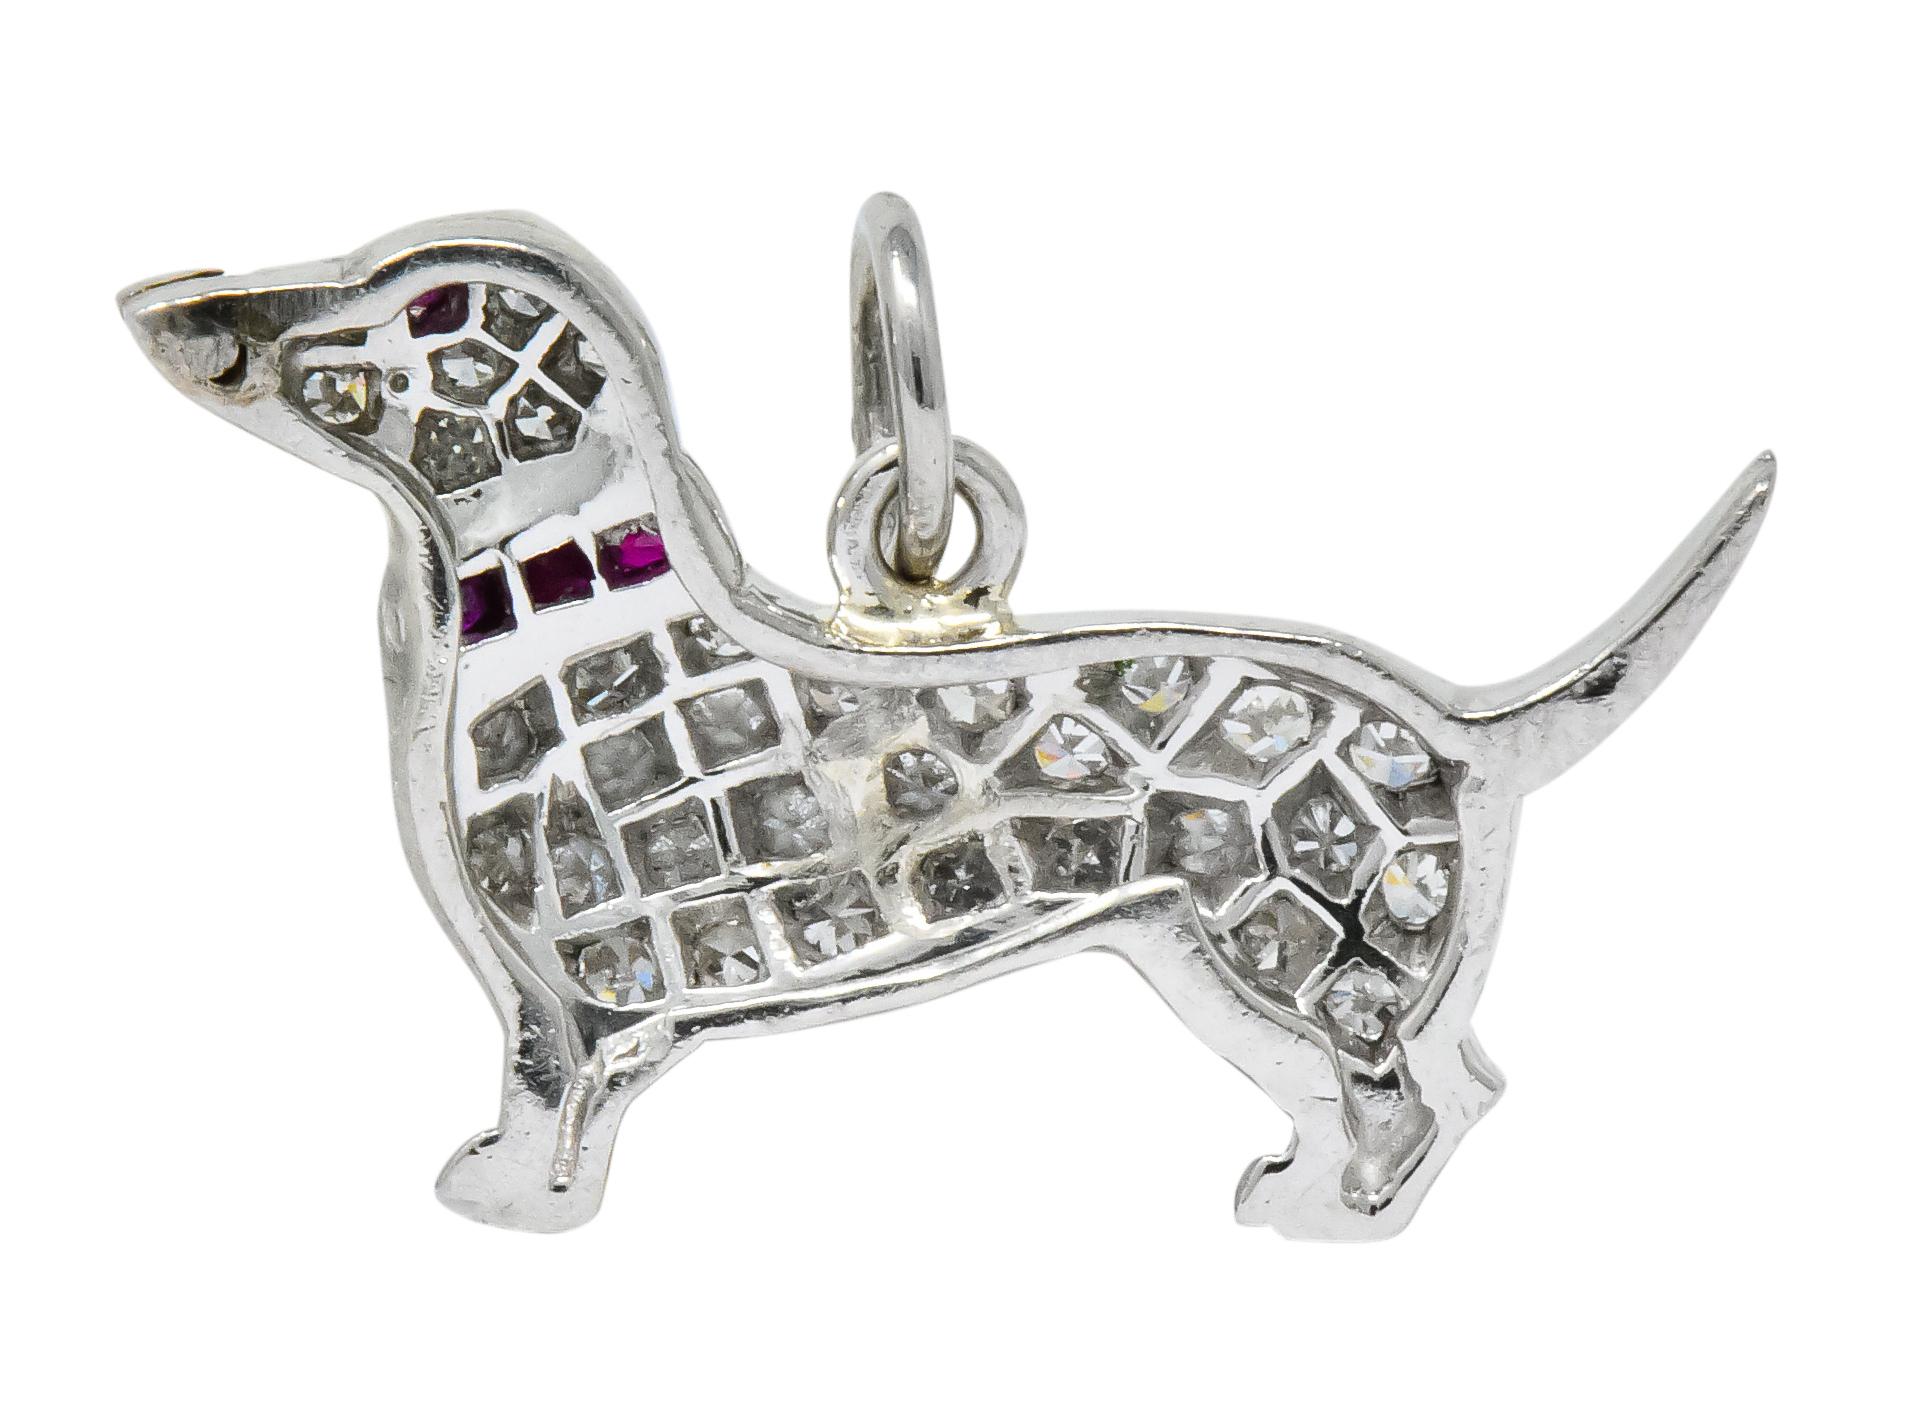 Dachshund dog charm pavé set throughout with single cut diamonds weighing approximately 0.25 carat, eye-clean and white

With small round cabochon ruby eye, and channel set calibré cut ruby collar

Accented by high polished nose, feet, and